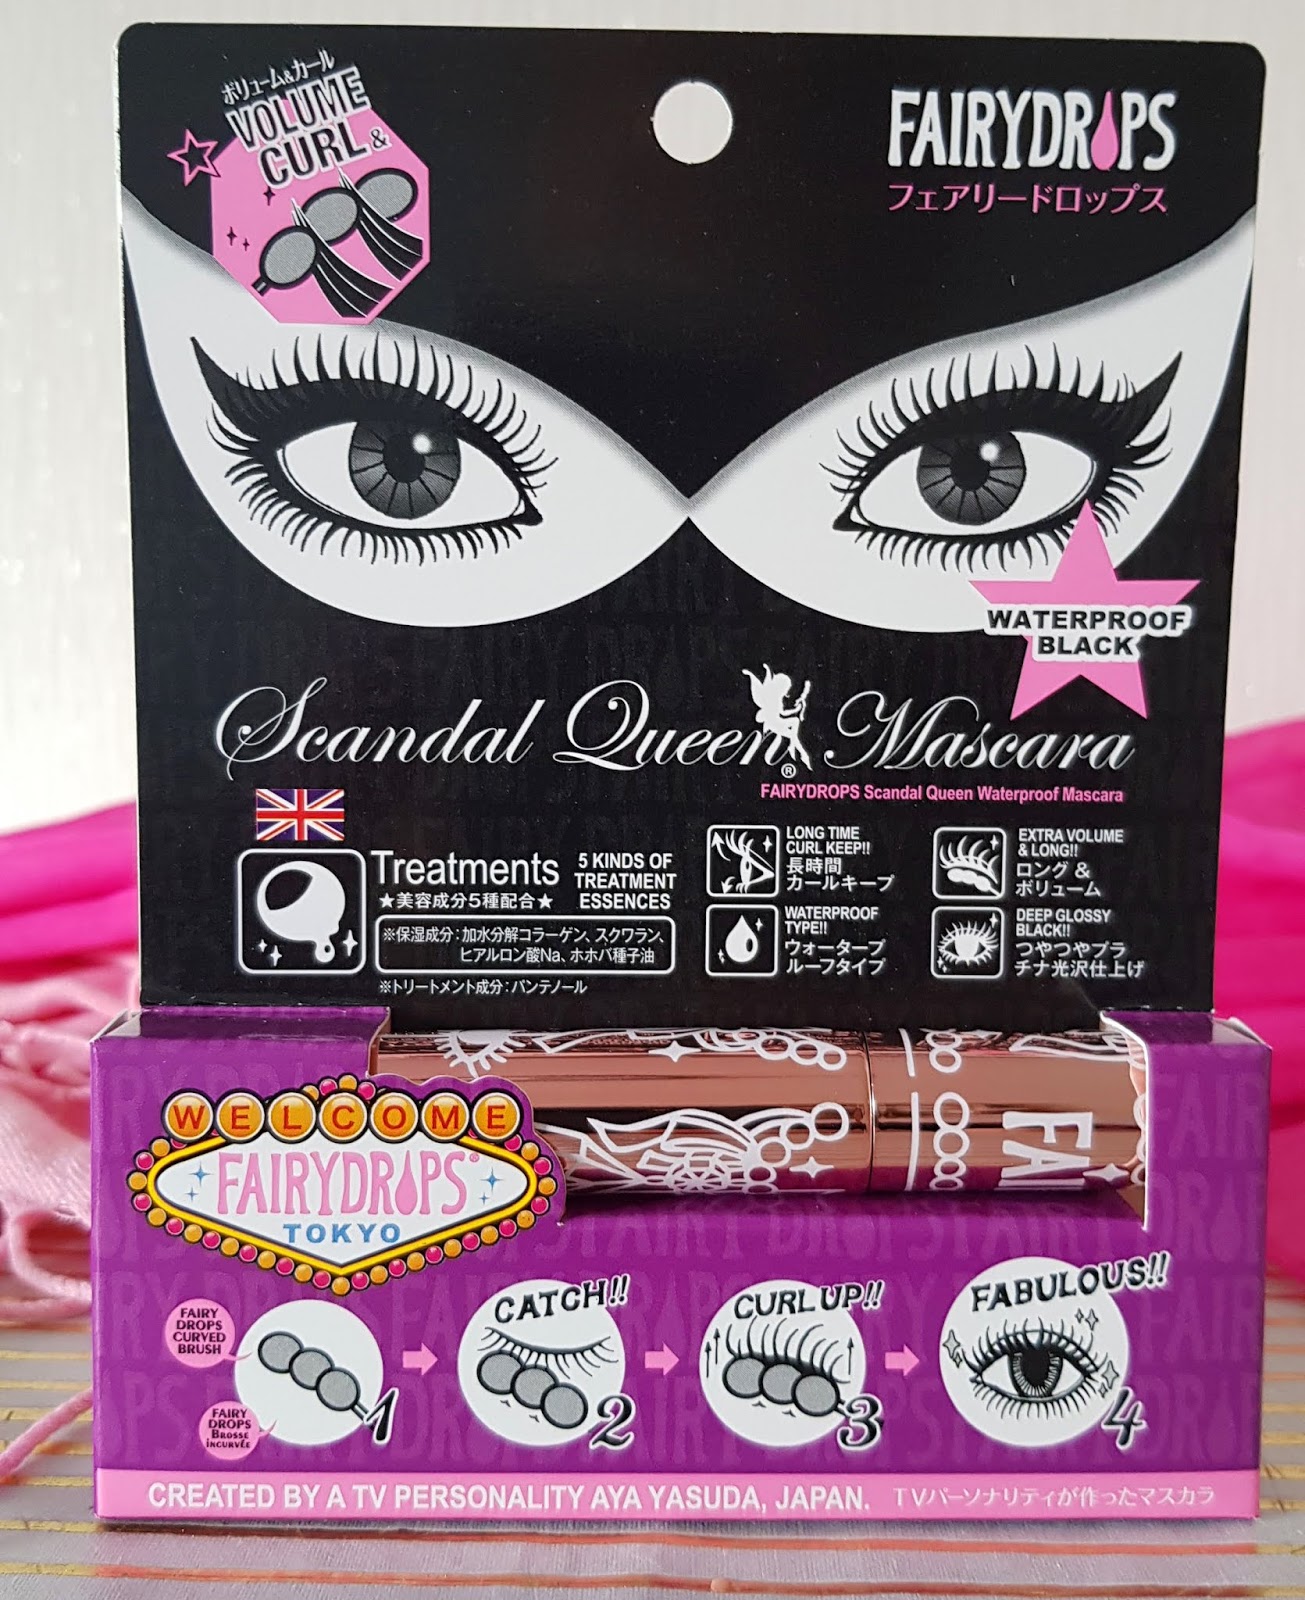 The packaging of Fairydrops Scandal Queen waterproof mascara makes it look like it's aimed at adolescent girls but the rose gold casing is quite sophisticated and the mascara performs very well on nearly every vector